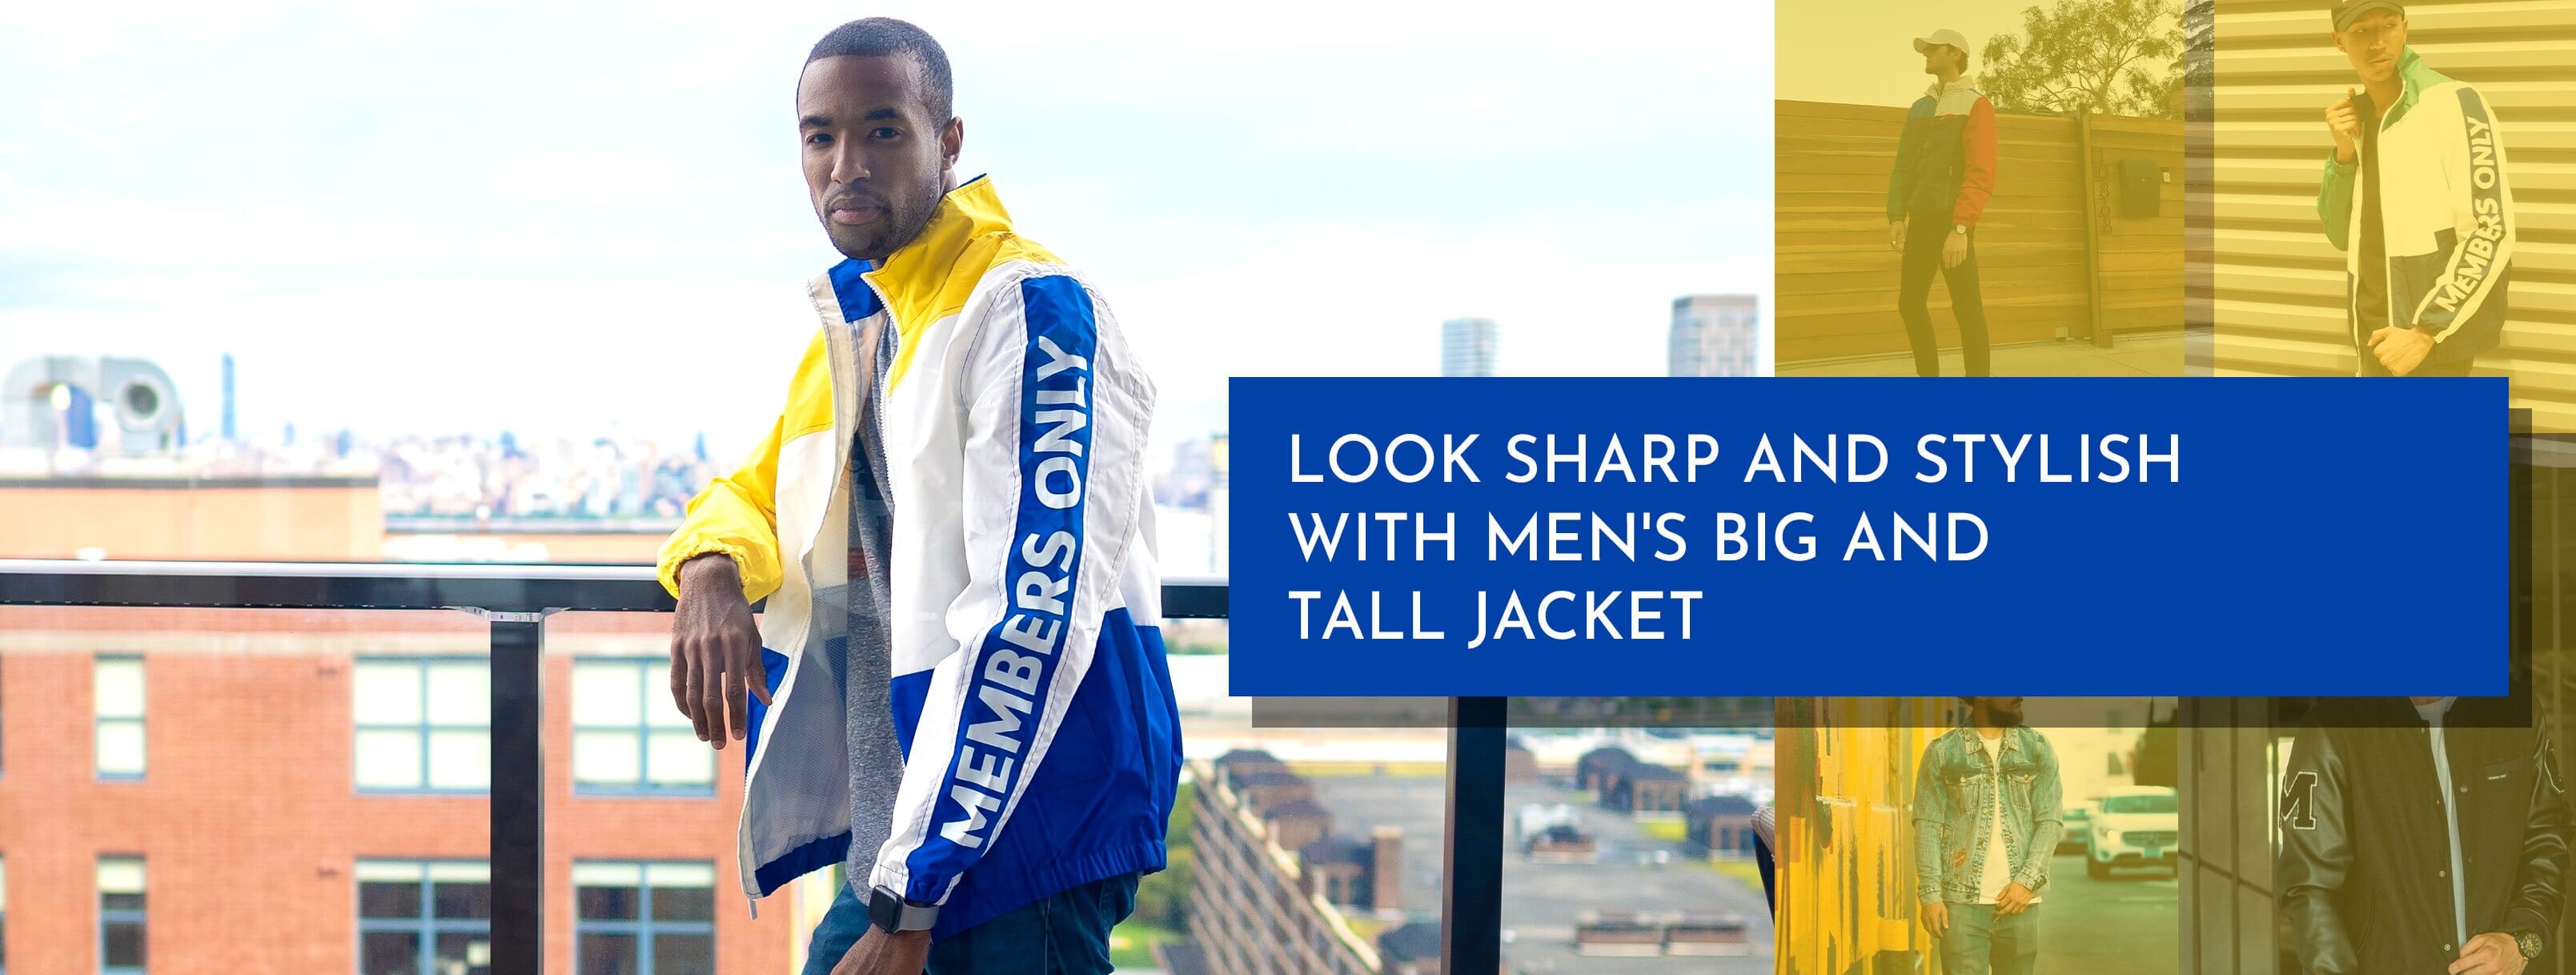 Look Sharp And Stylish With Men's Big And Tall Jacket – Members Only®